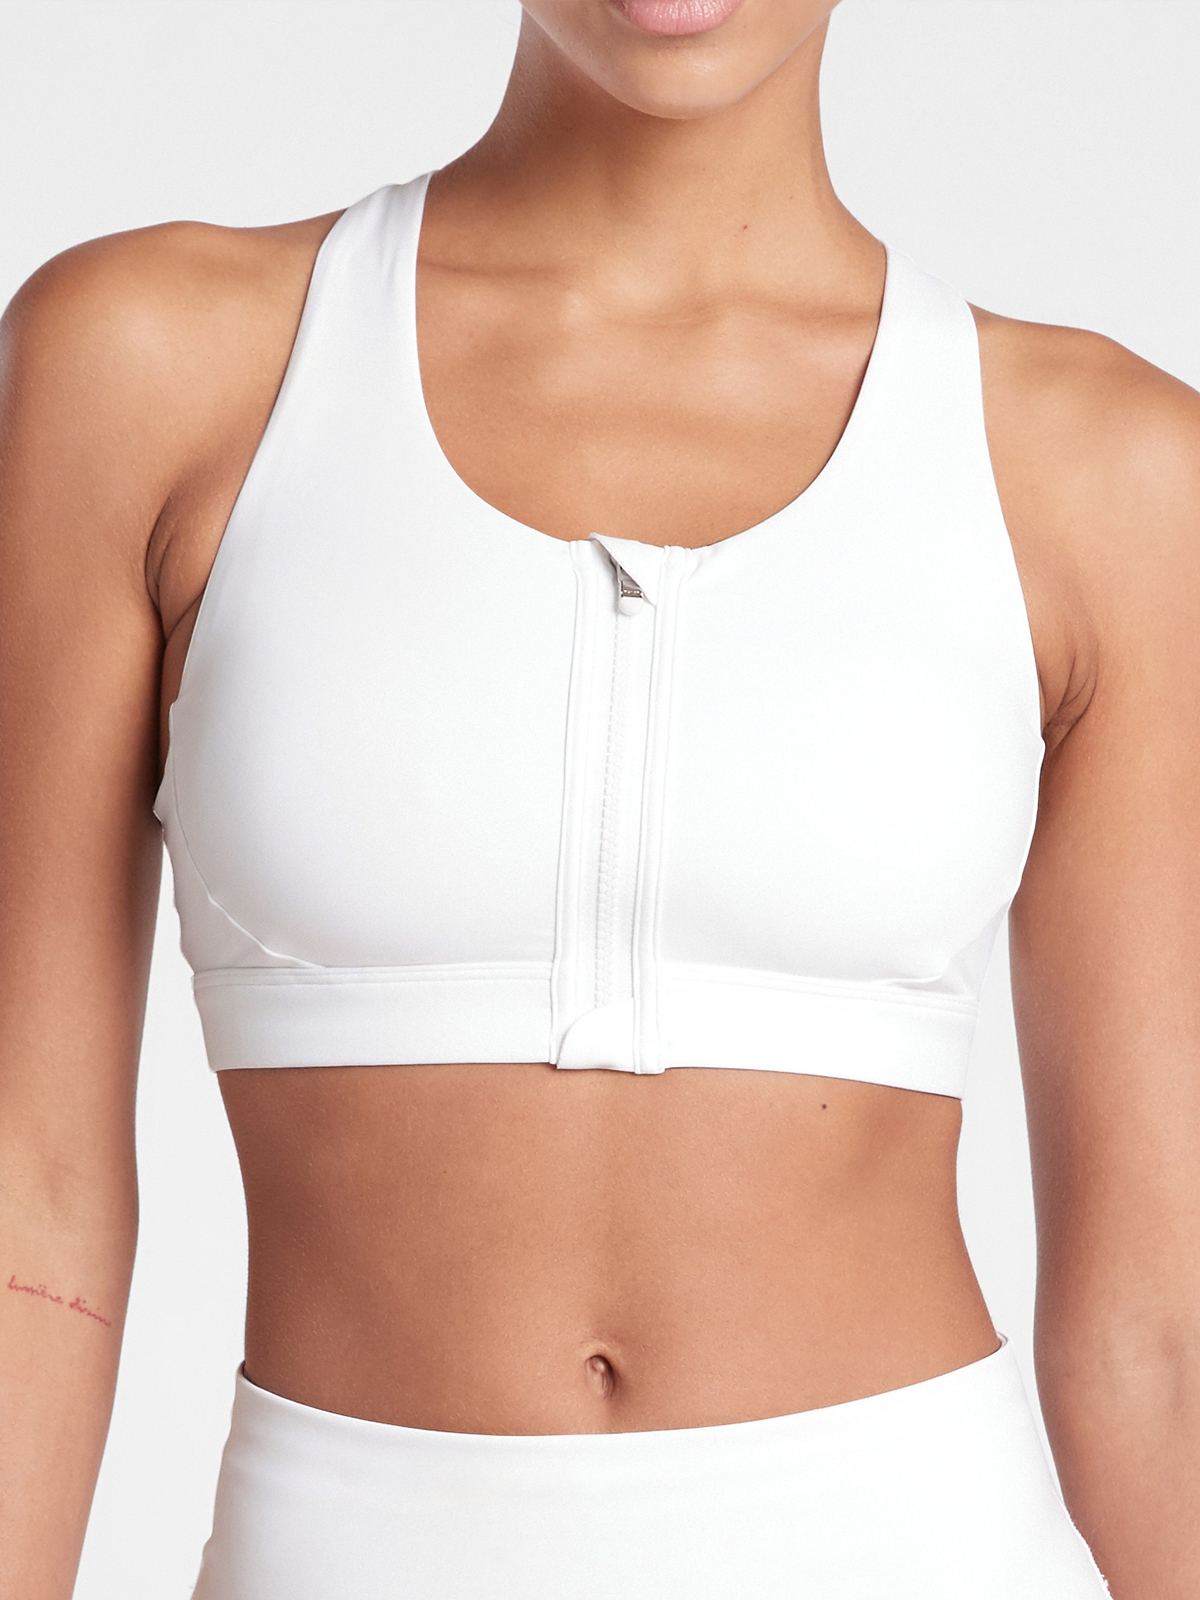 Comfortable sports bra with zipper placket